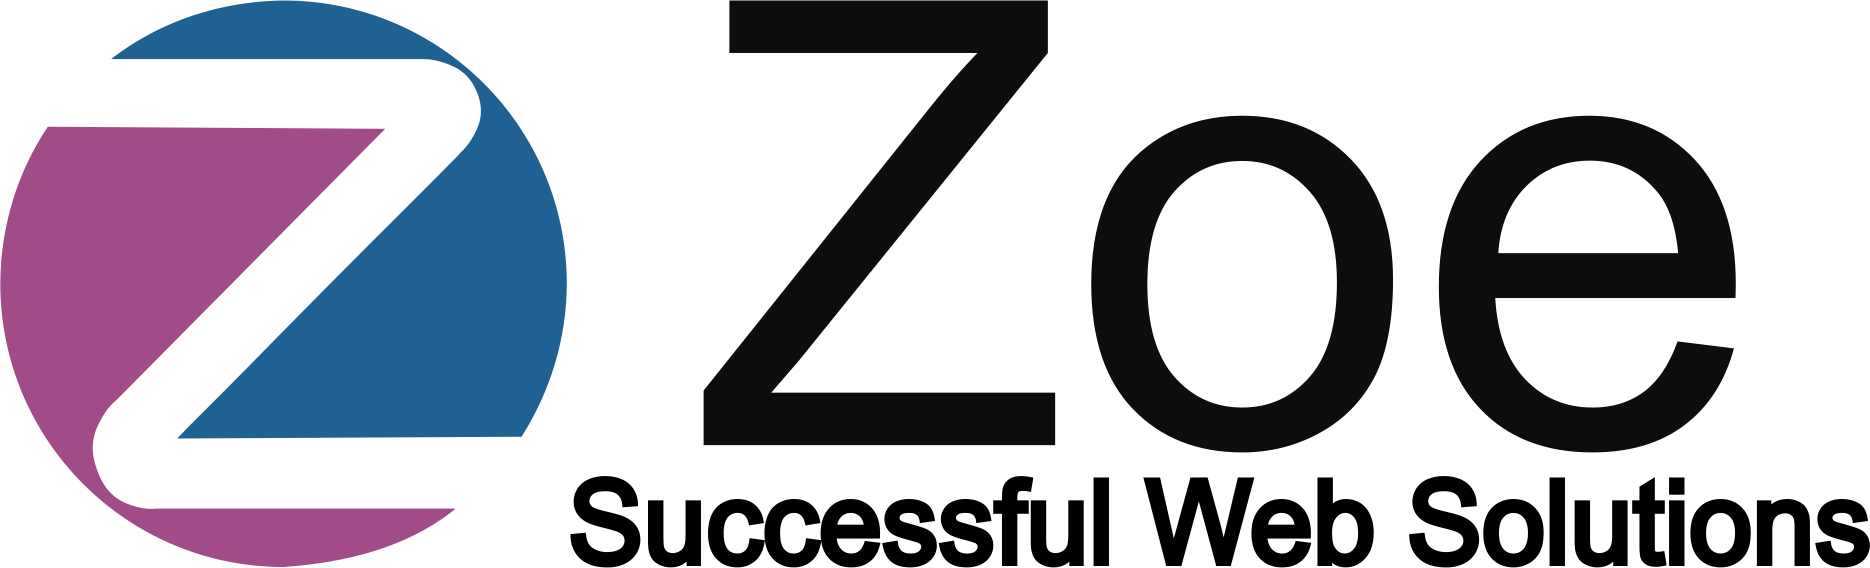 Zoe_Successful_Web_Solutions.png